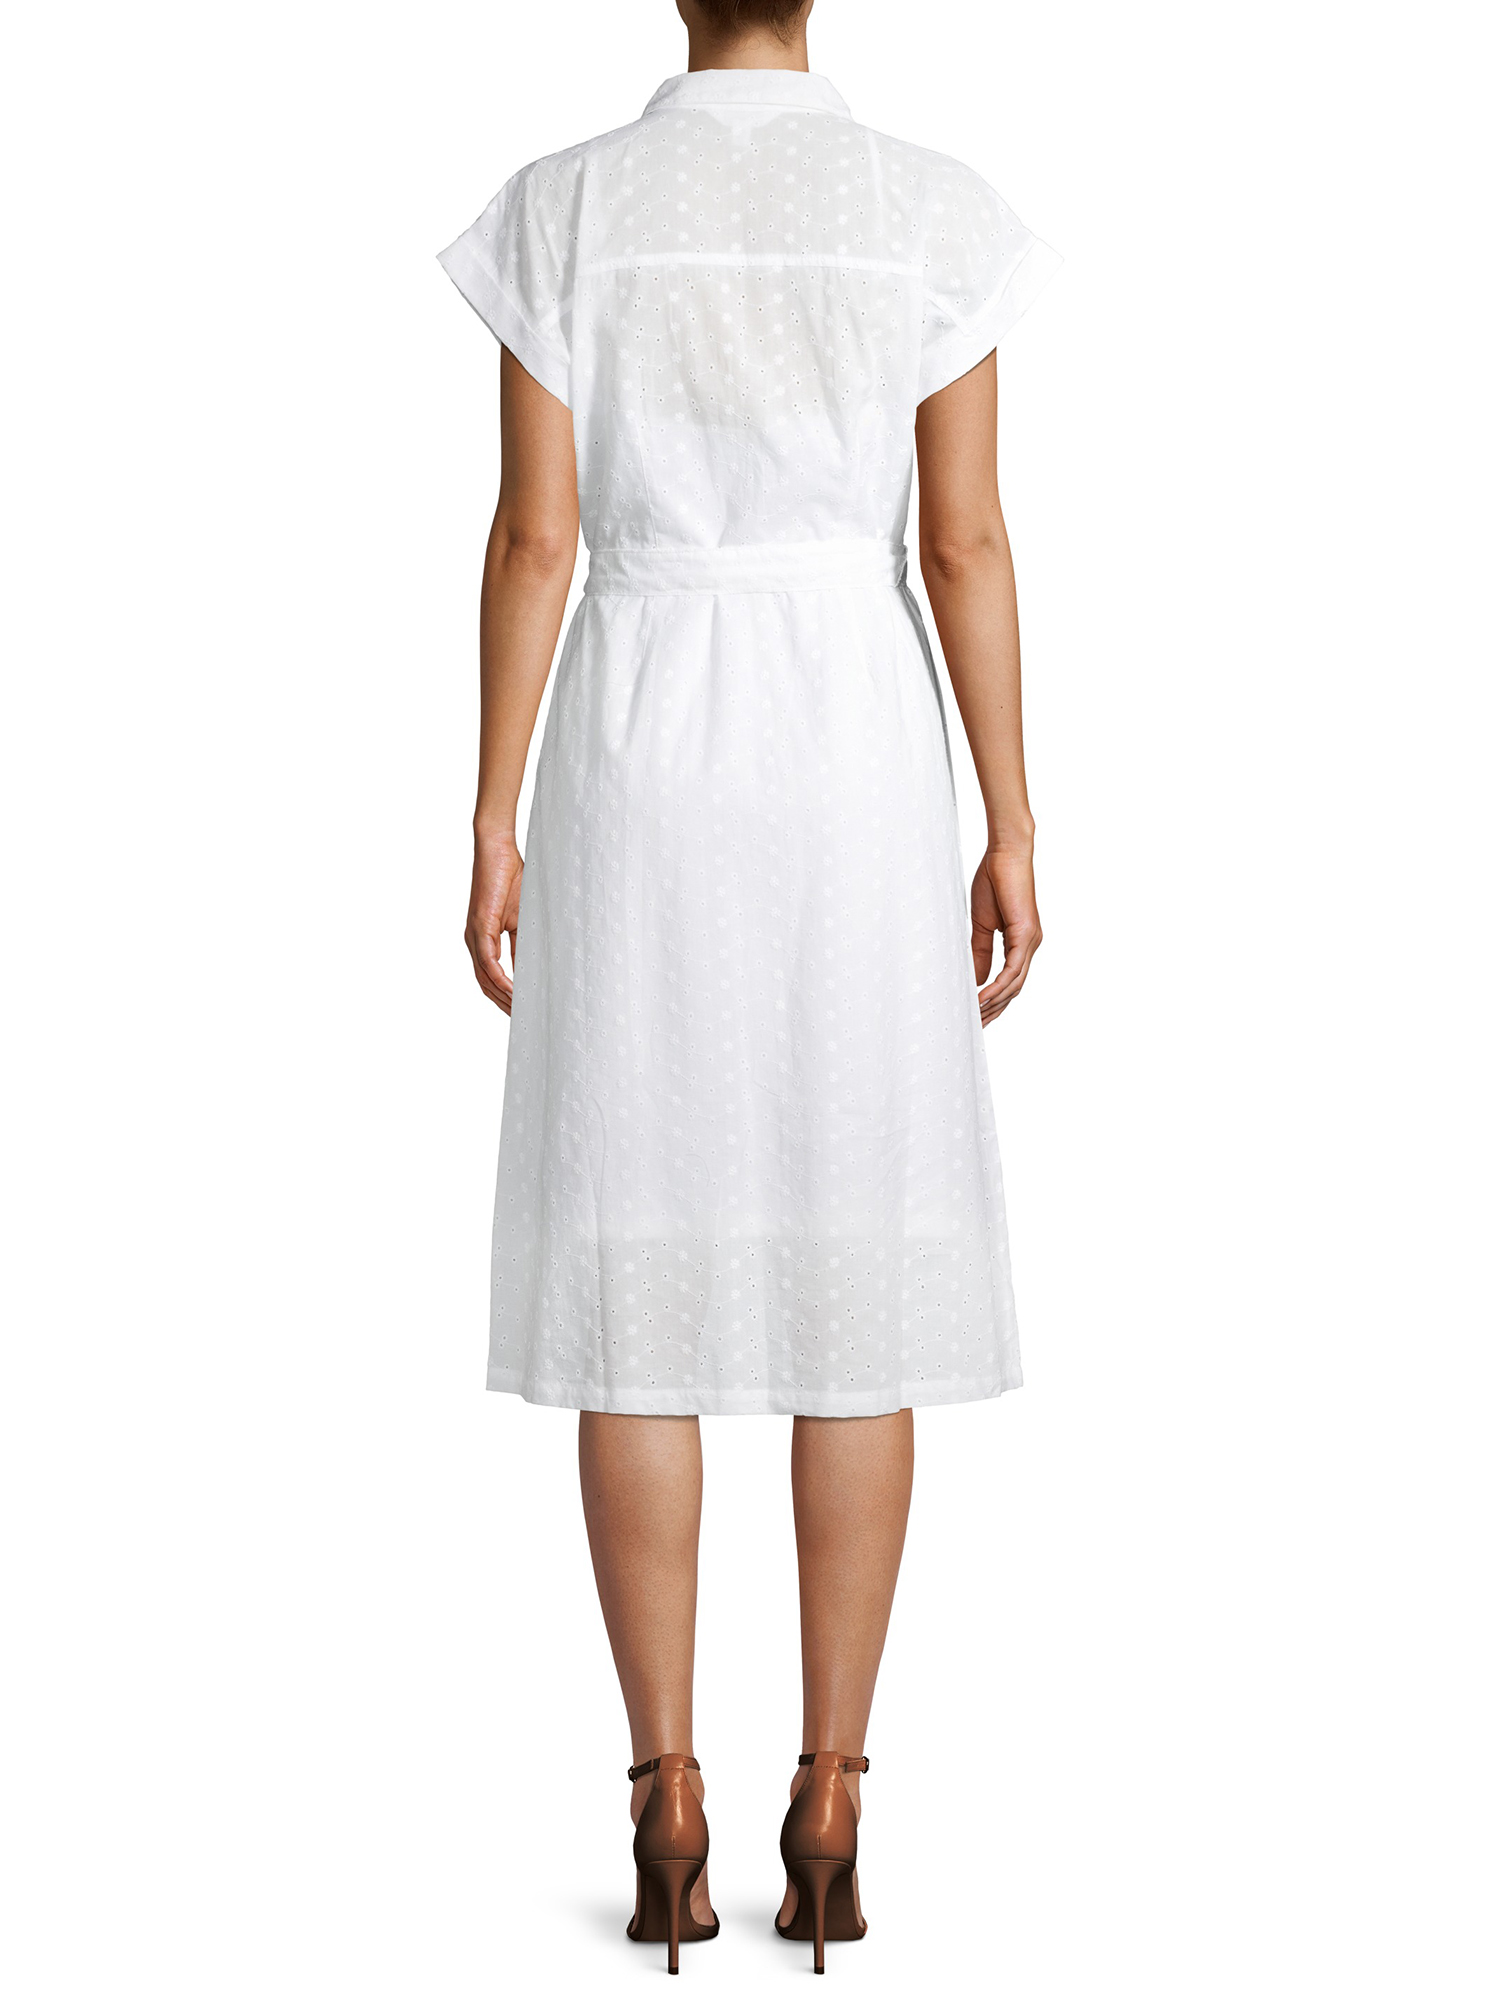 Time and Tru Women's Eyelet Belted Midi Shirt Dress - image 5 of 6